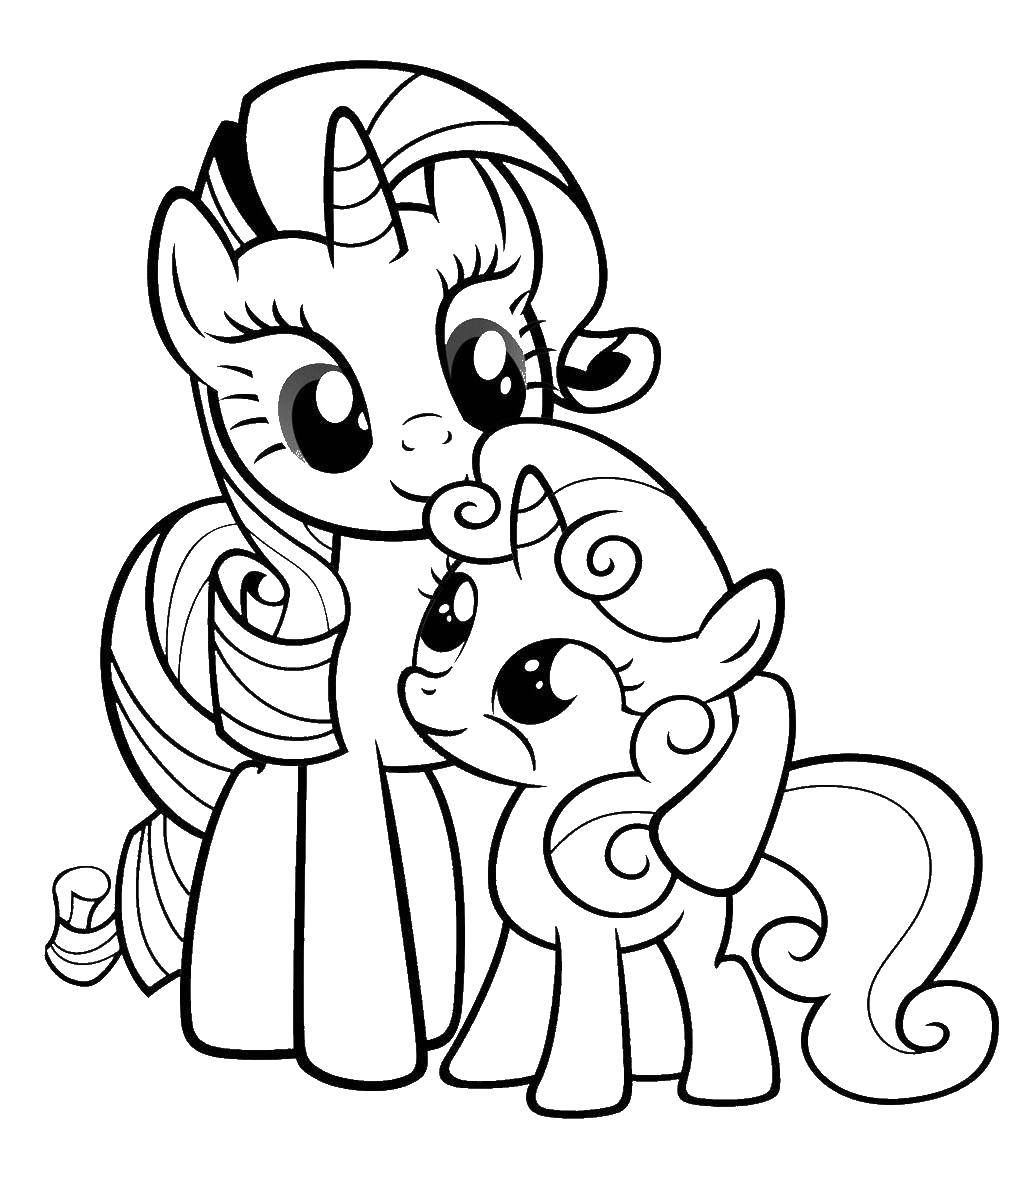 Coloring Two panasci. Category my little pony. Tags:  Pony, My little pony.